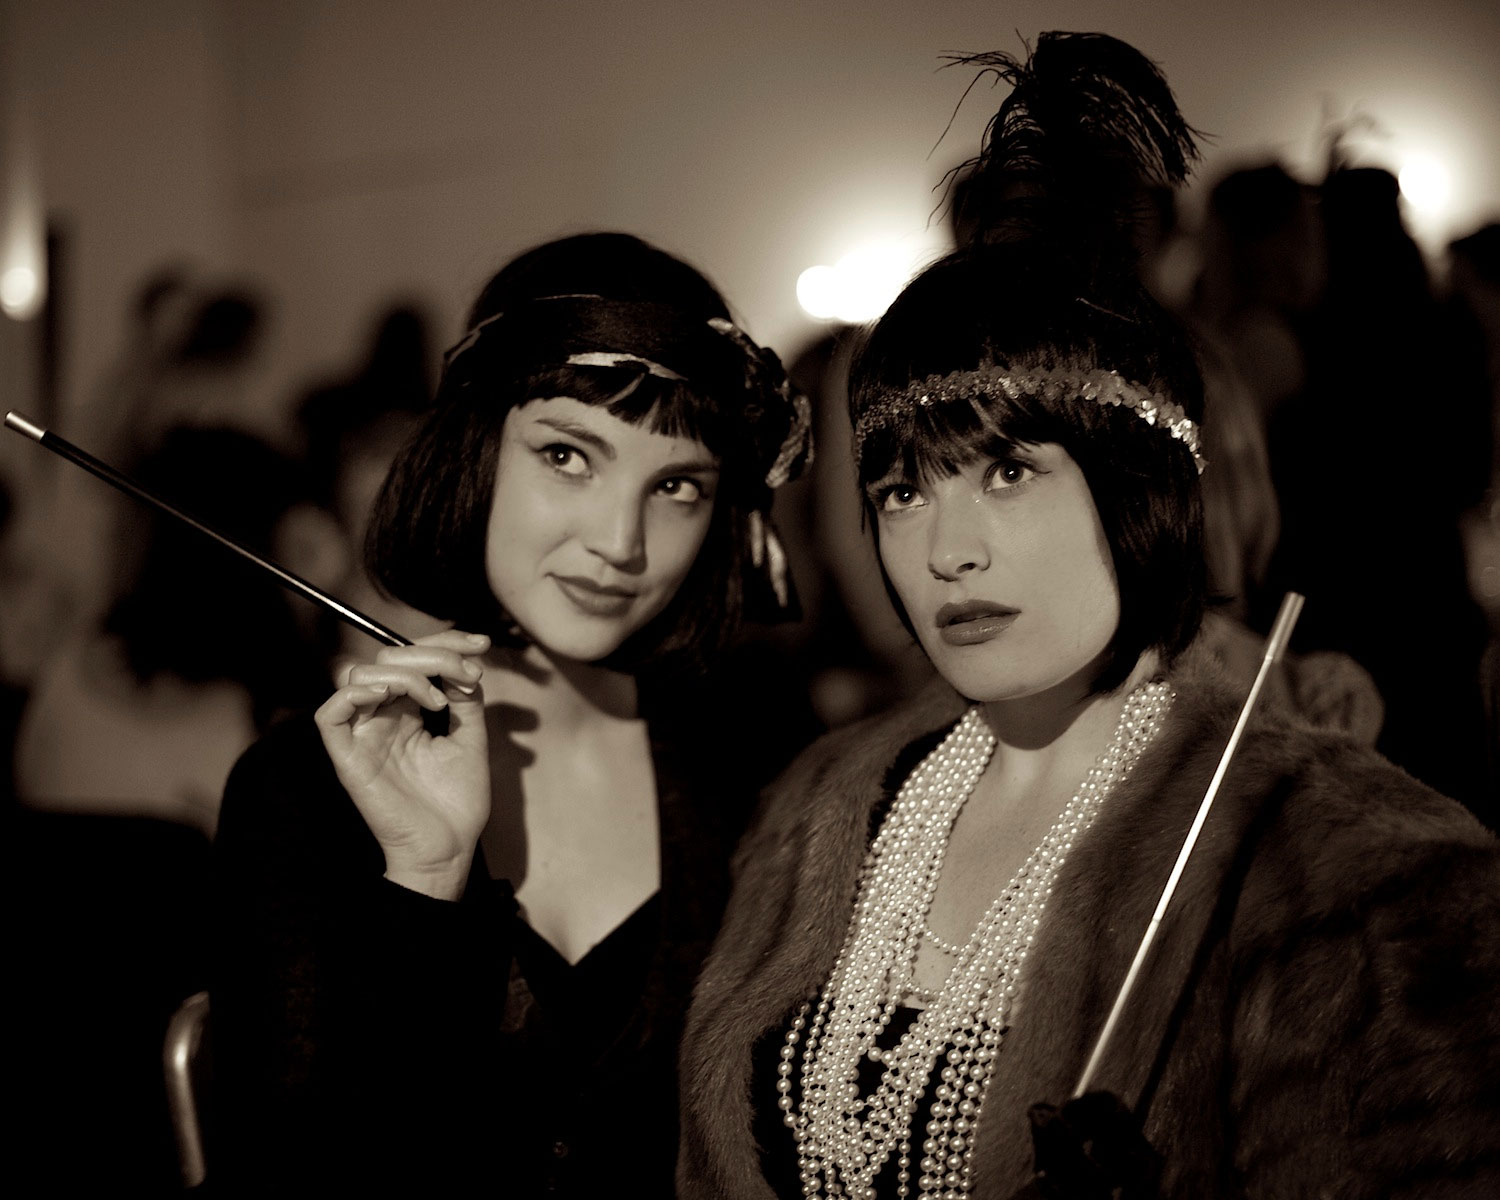 Two flappers with black bobs and long cigarette holders